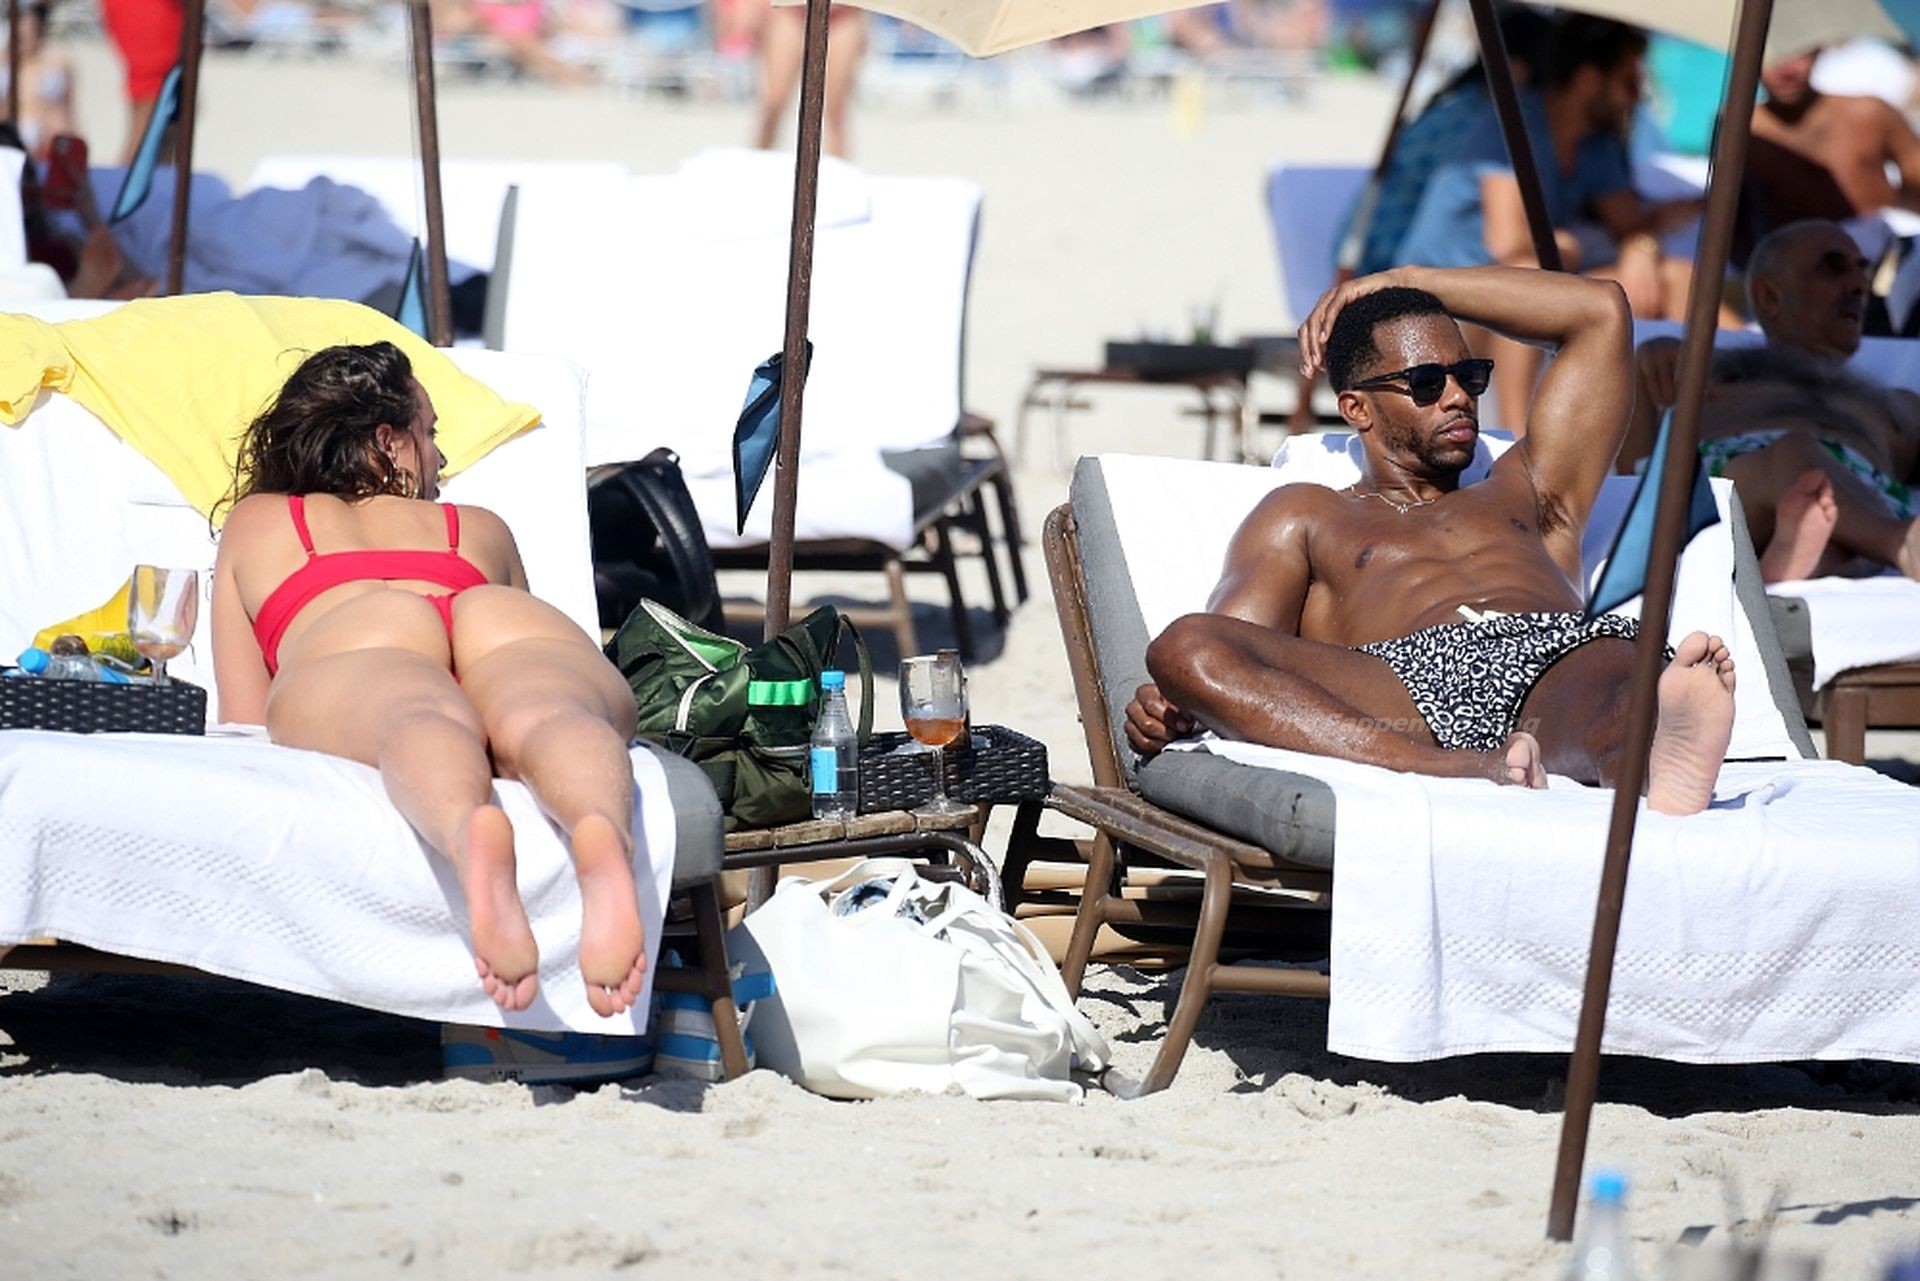 Victor Cruz is Seen on the Beach with YesJu
lz in Miami (26 Photos)